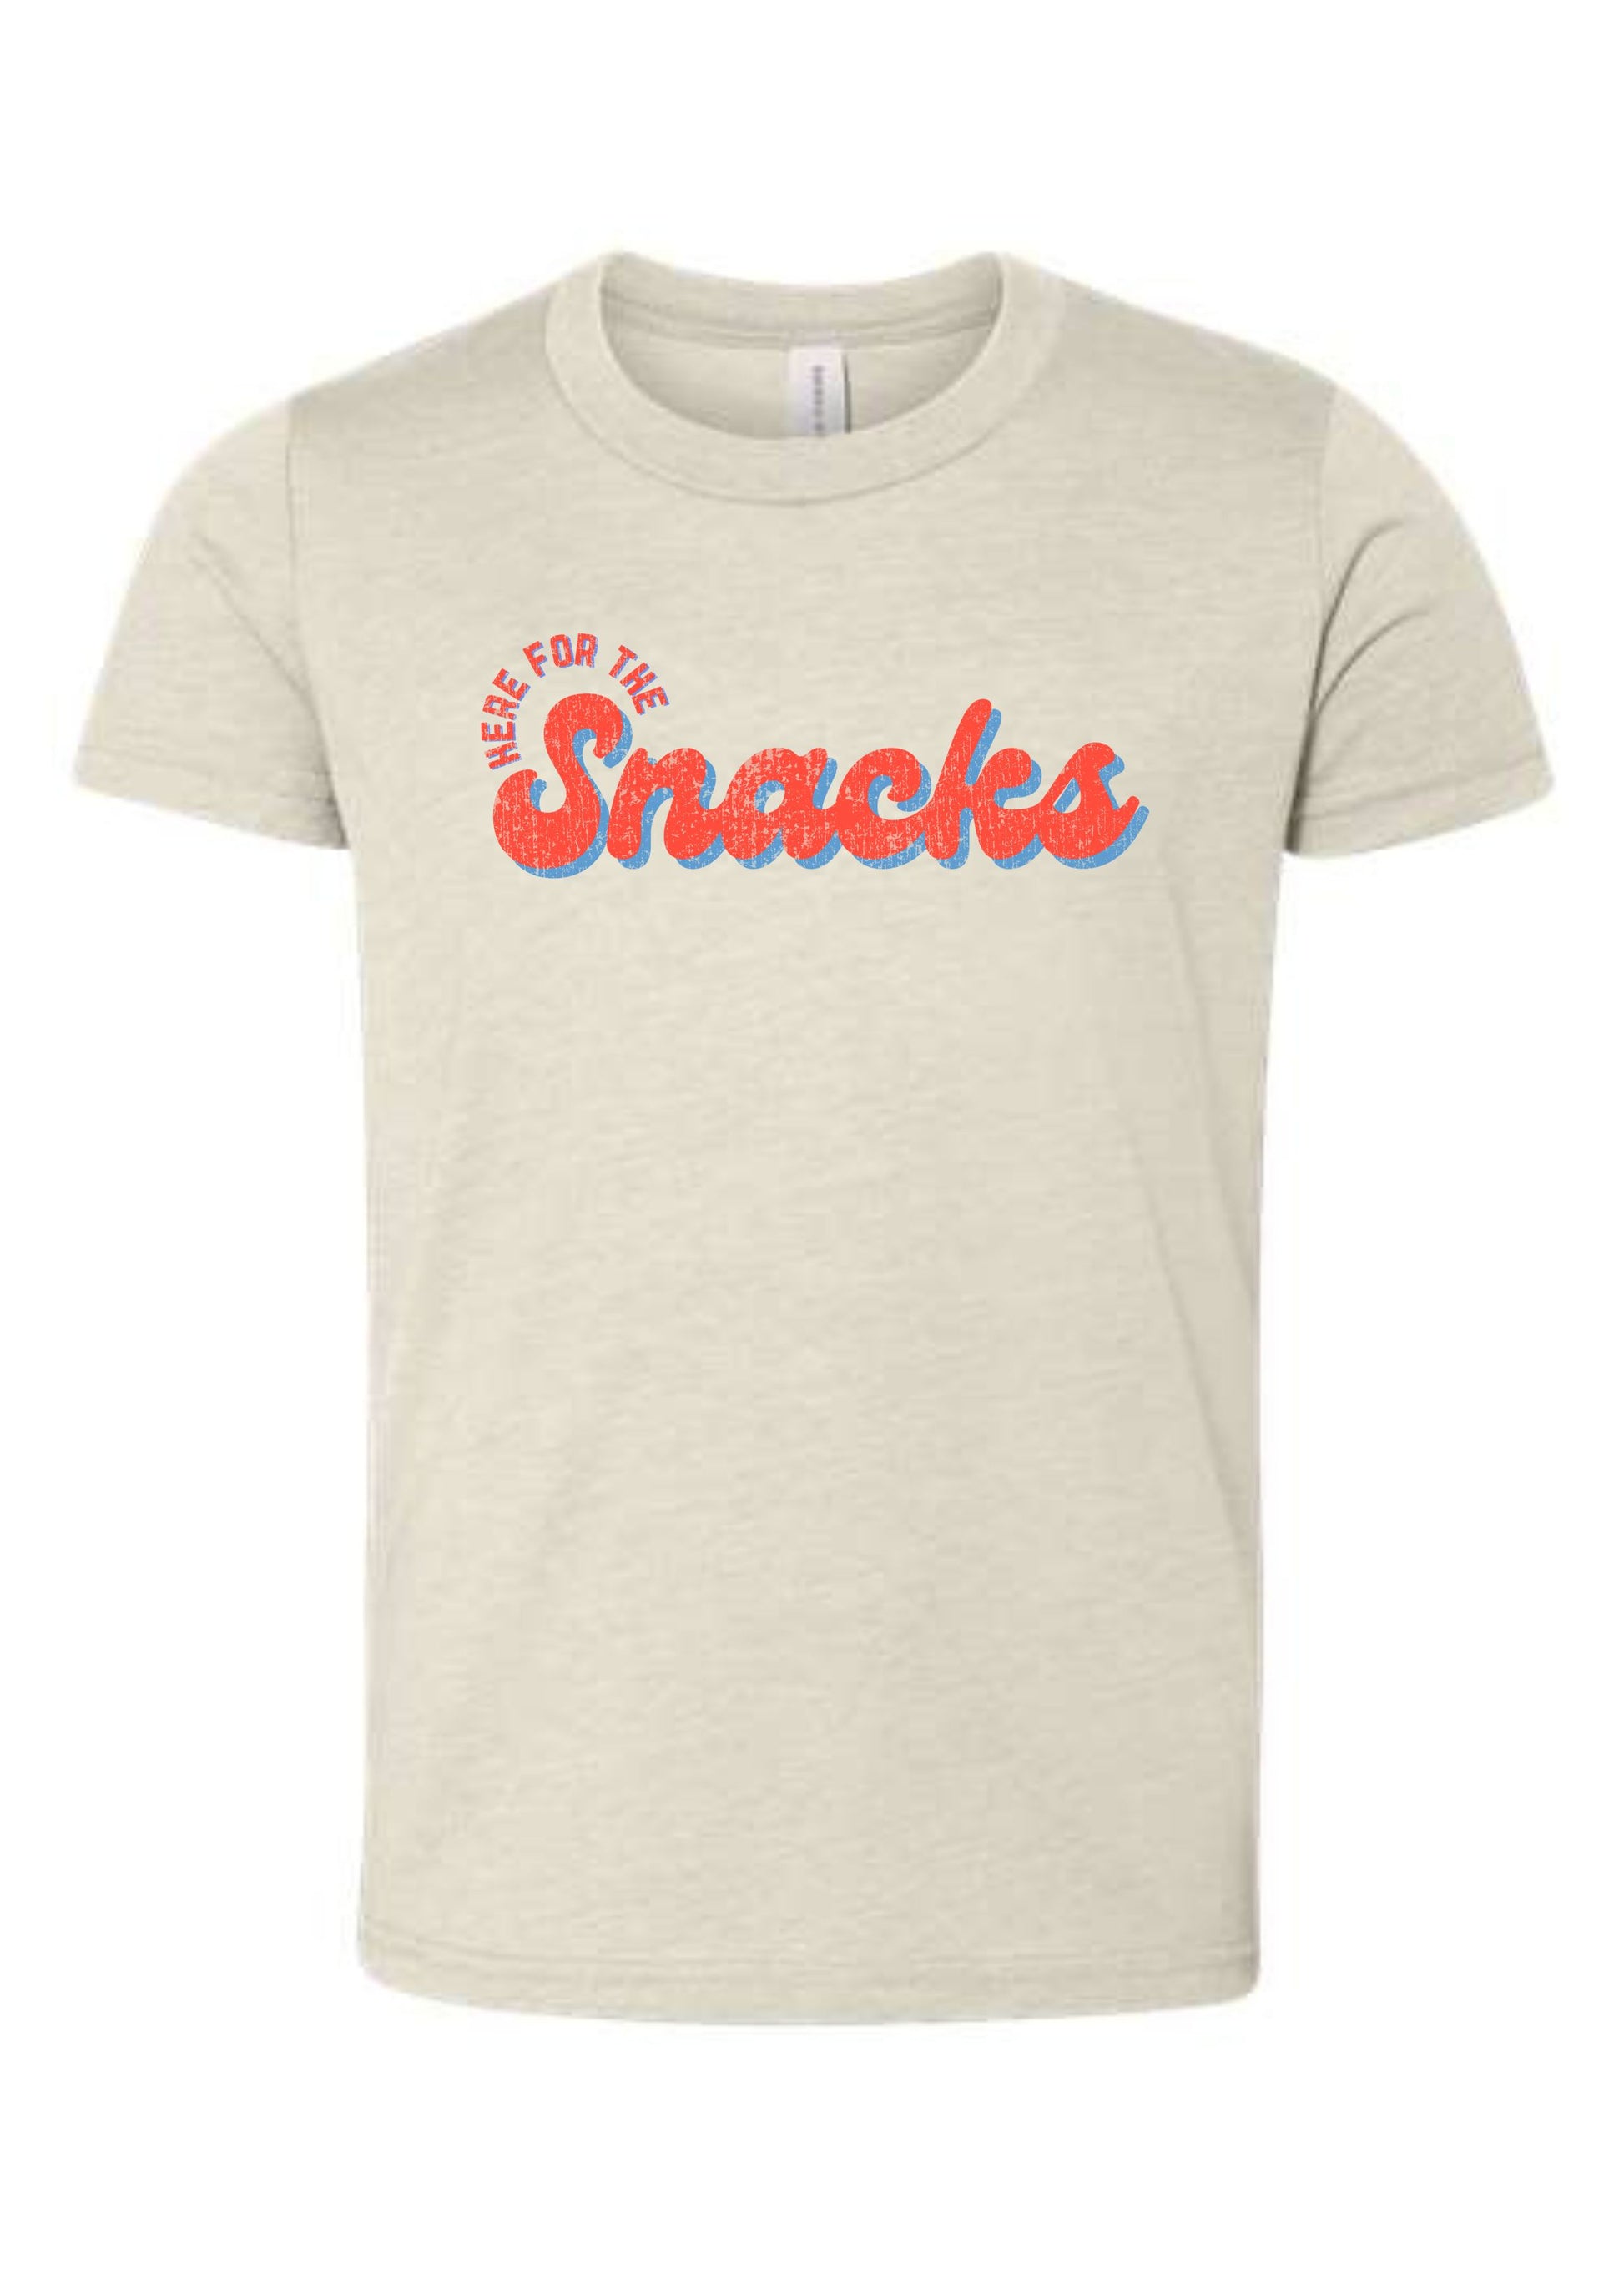 Here For The Snacks Baseball | Tee | Kids-Kids Tees-Sister Shirts-Sister Shirts, Cute & Custom Tees for Mama & Littles in Trussville, Alabama.